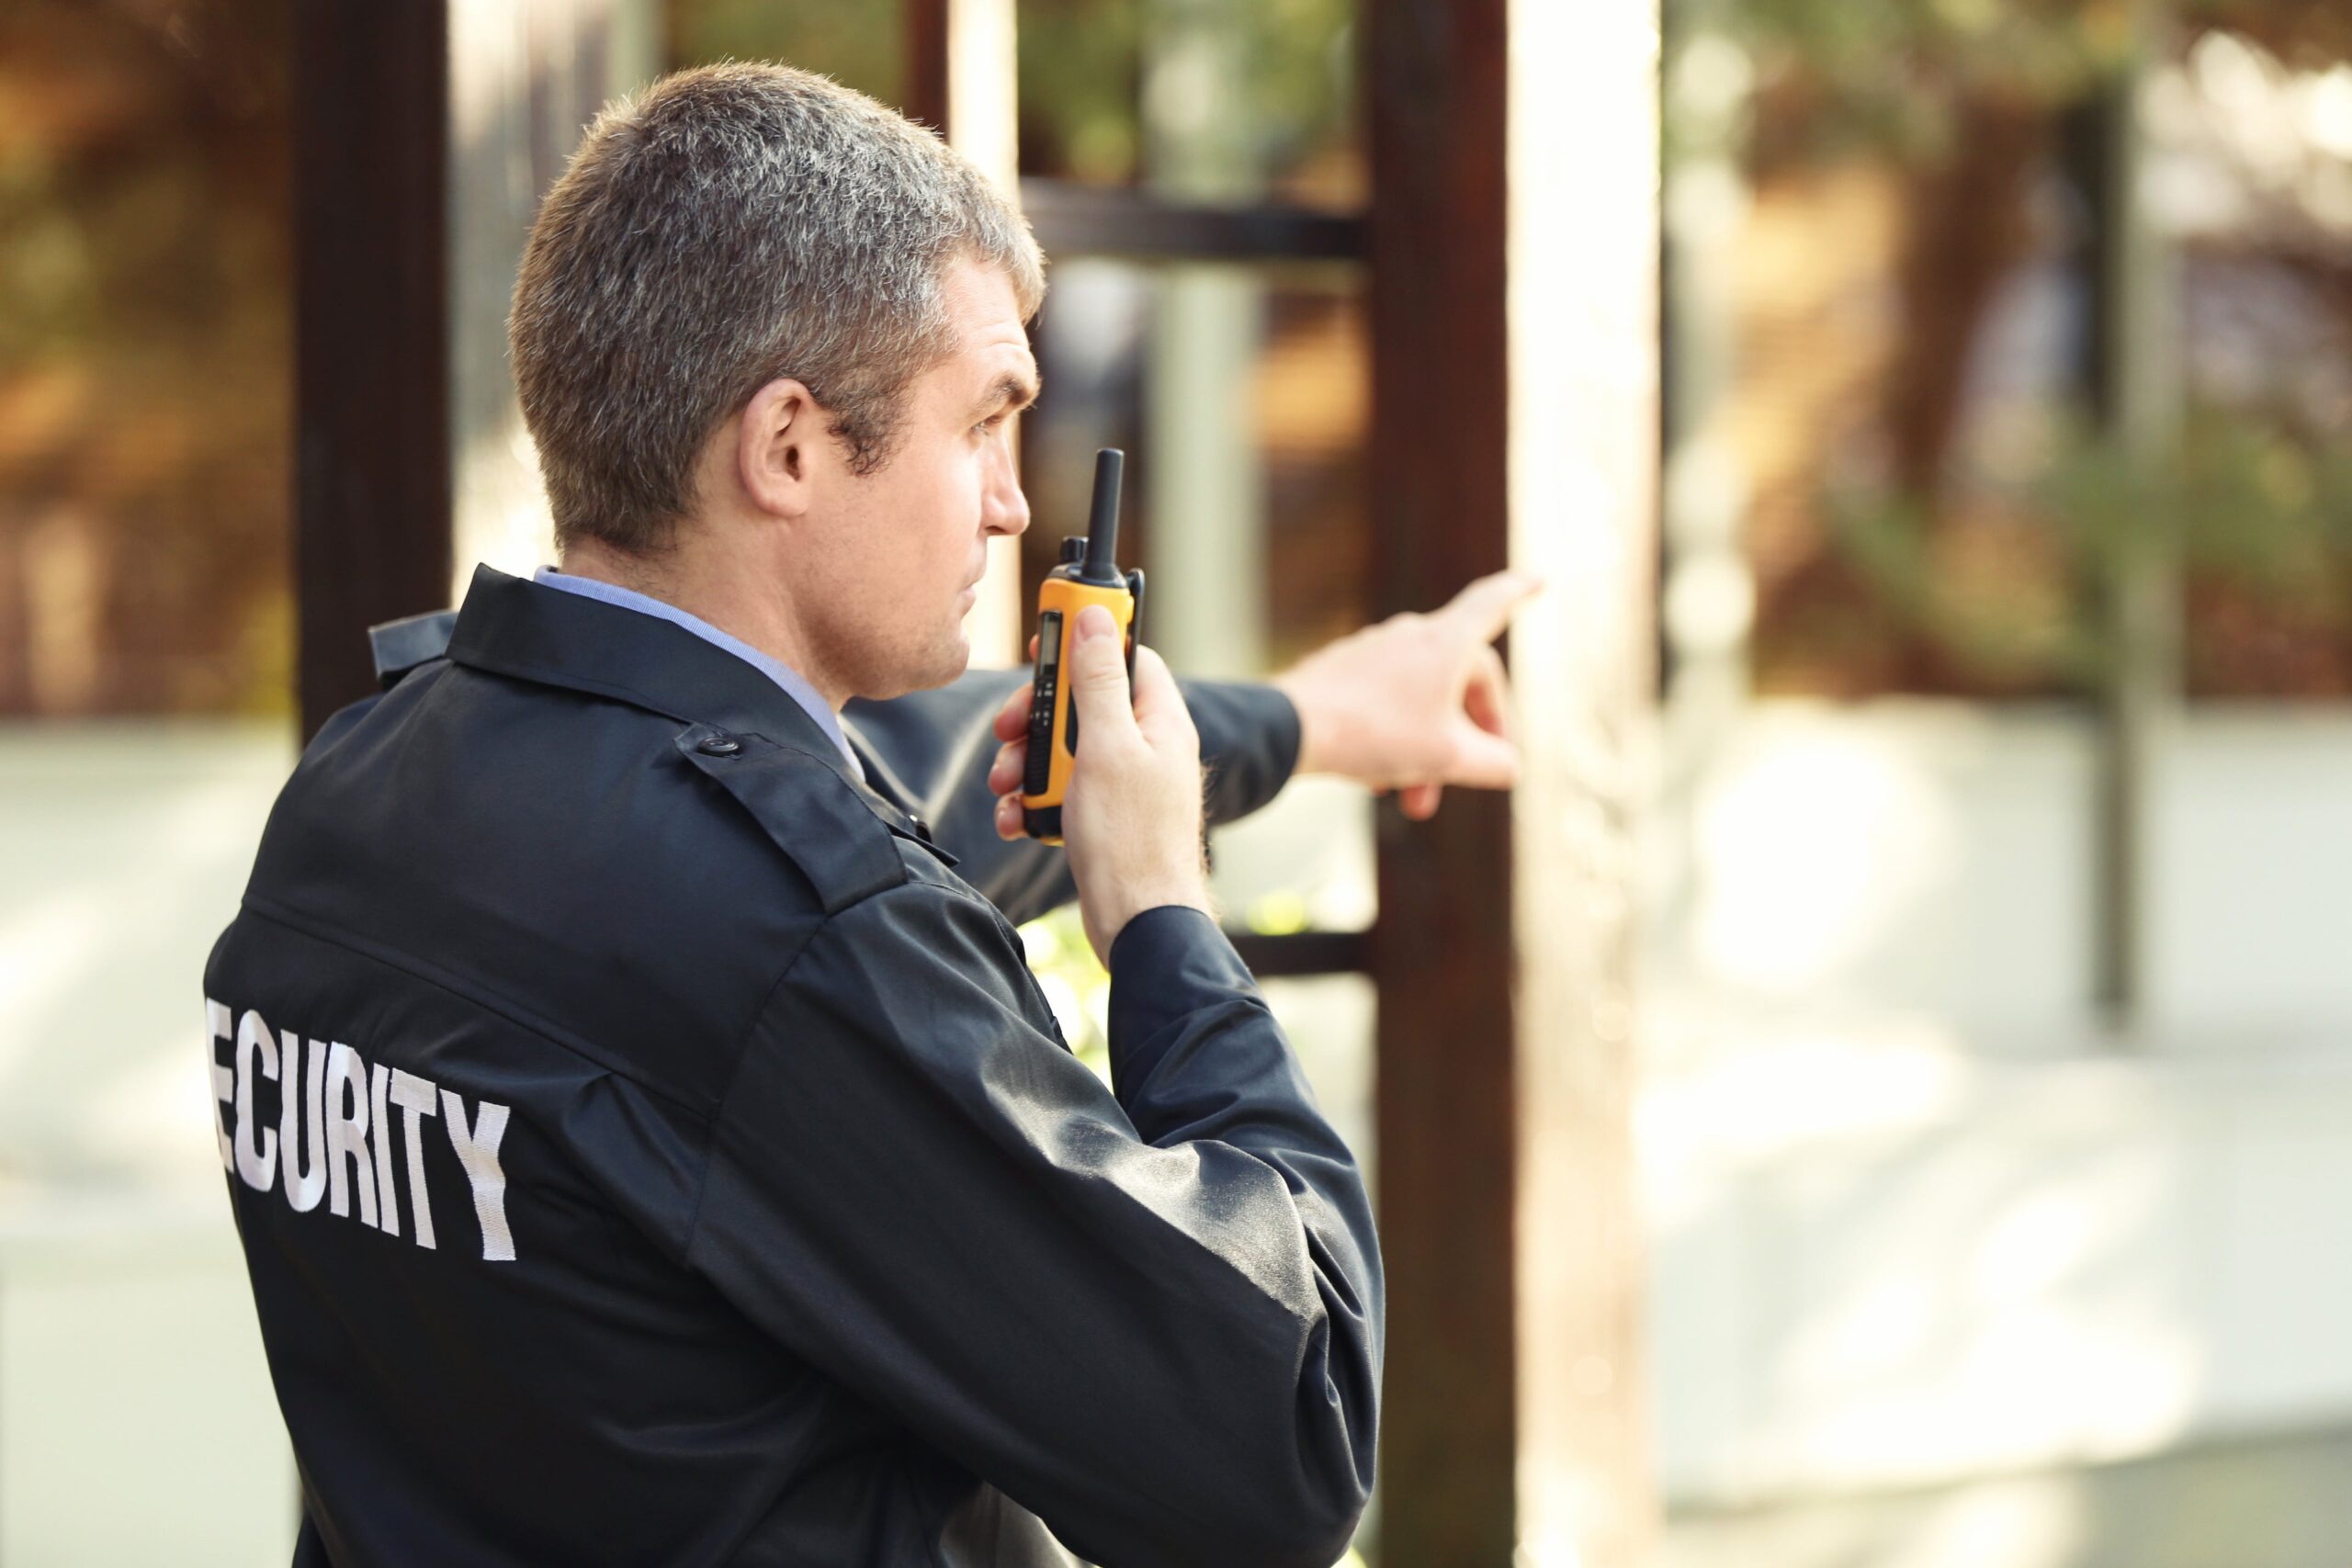 Top Tips for Getting Hired as a Security Guard